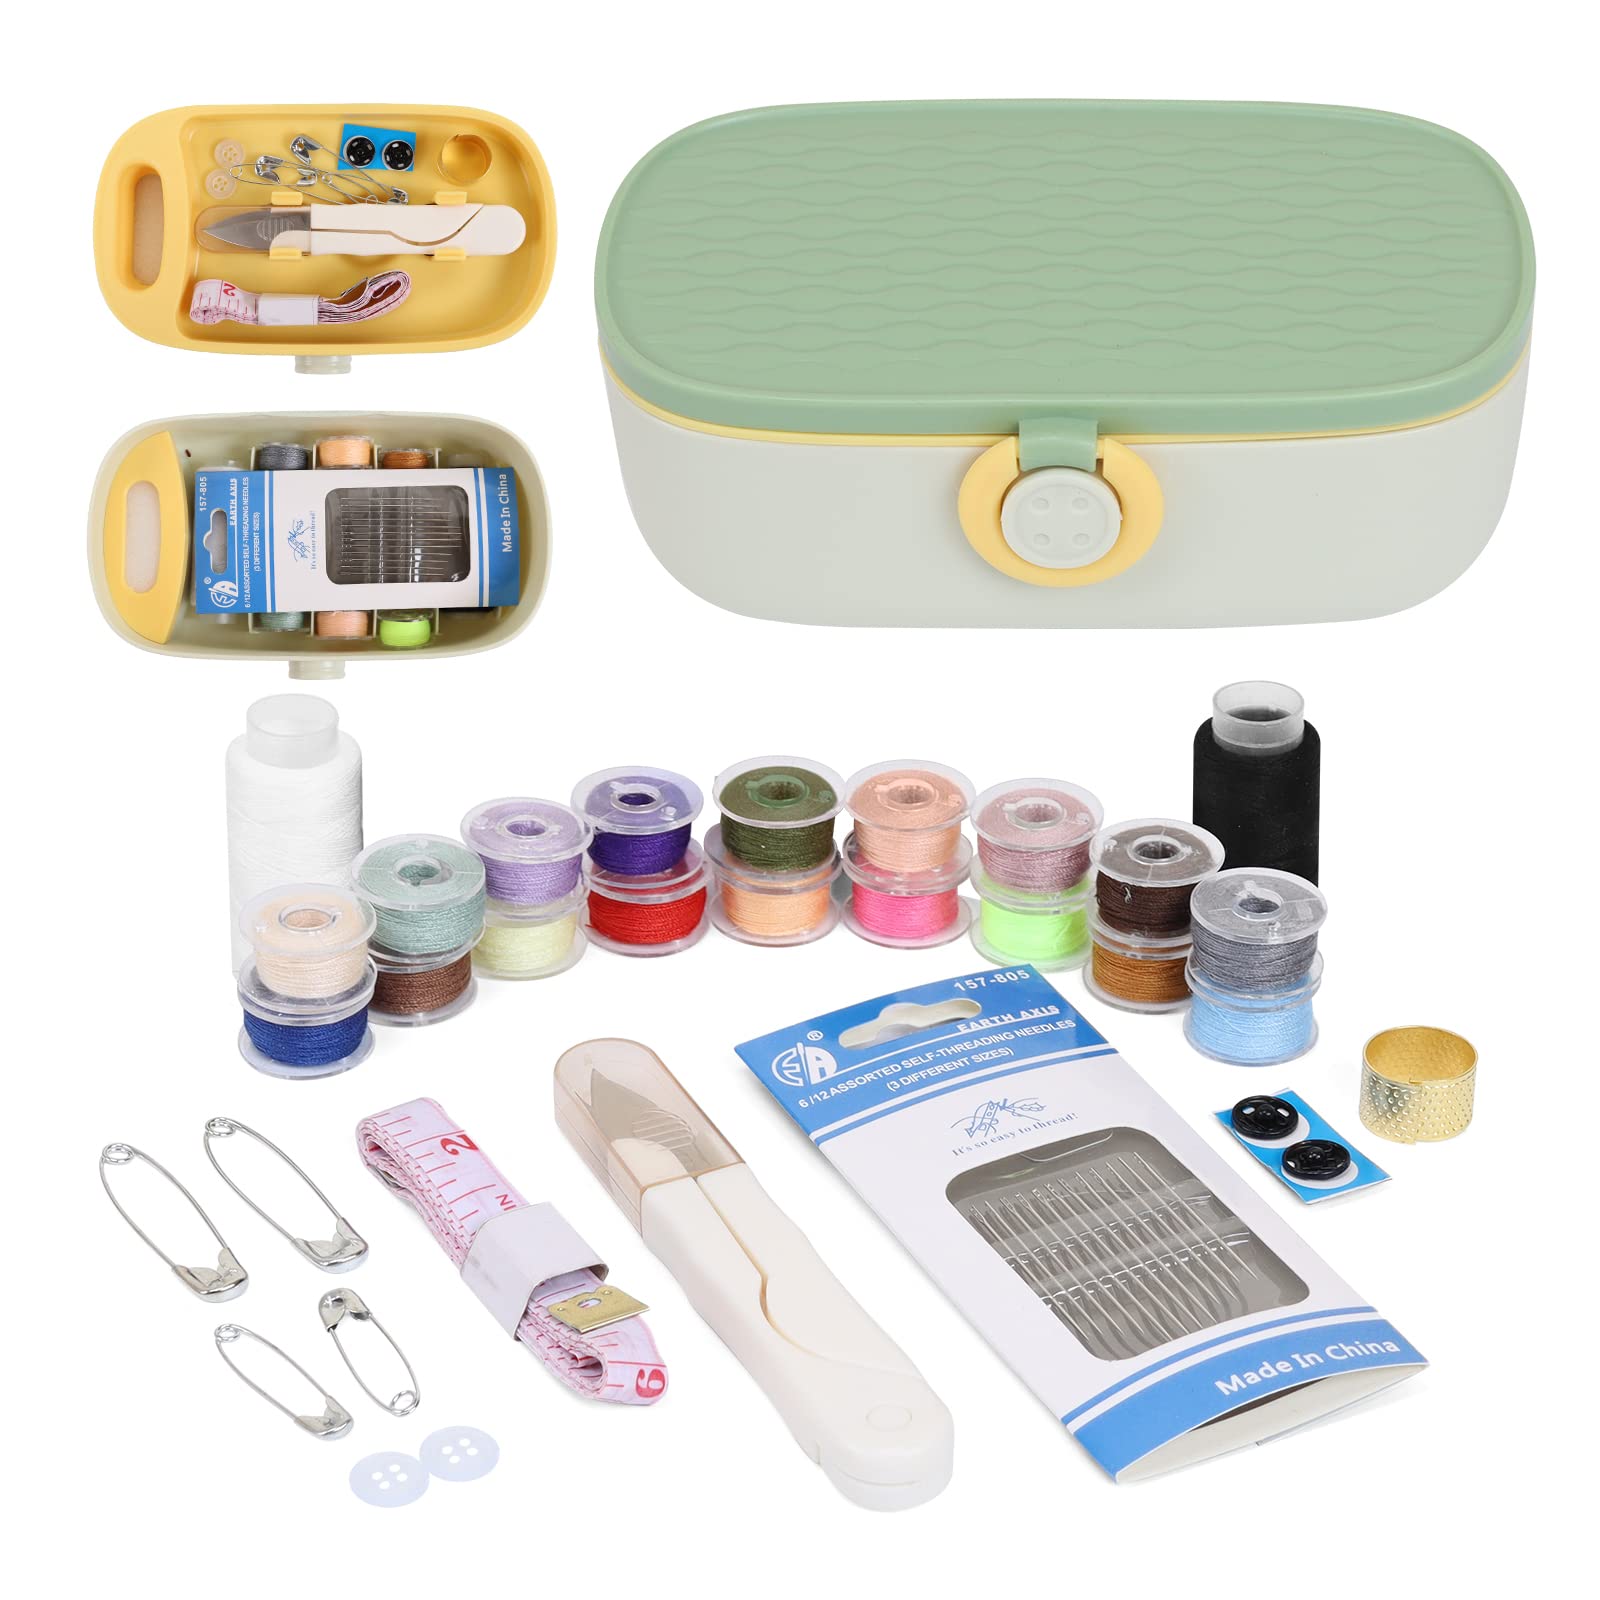 Sewing Project Kit, Portable Family Sewing Supplies Repair Kit